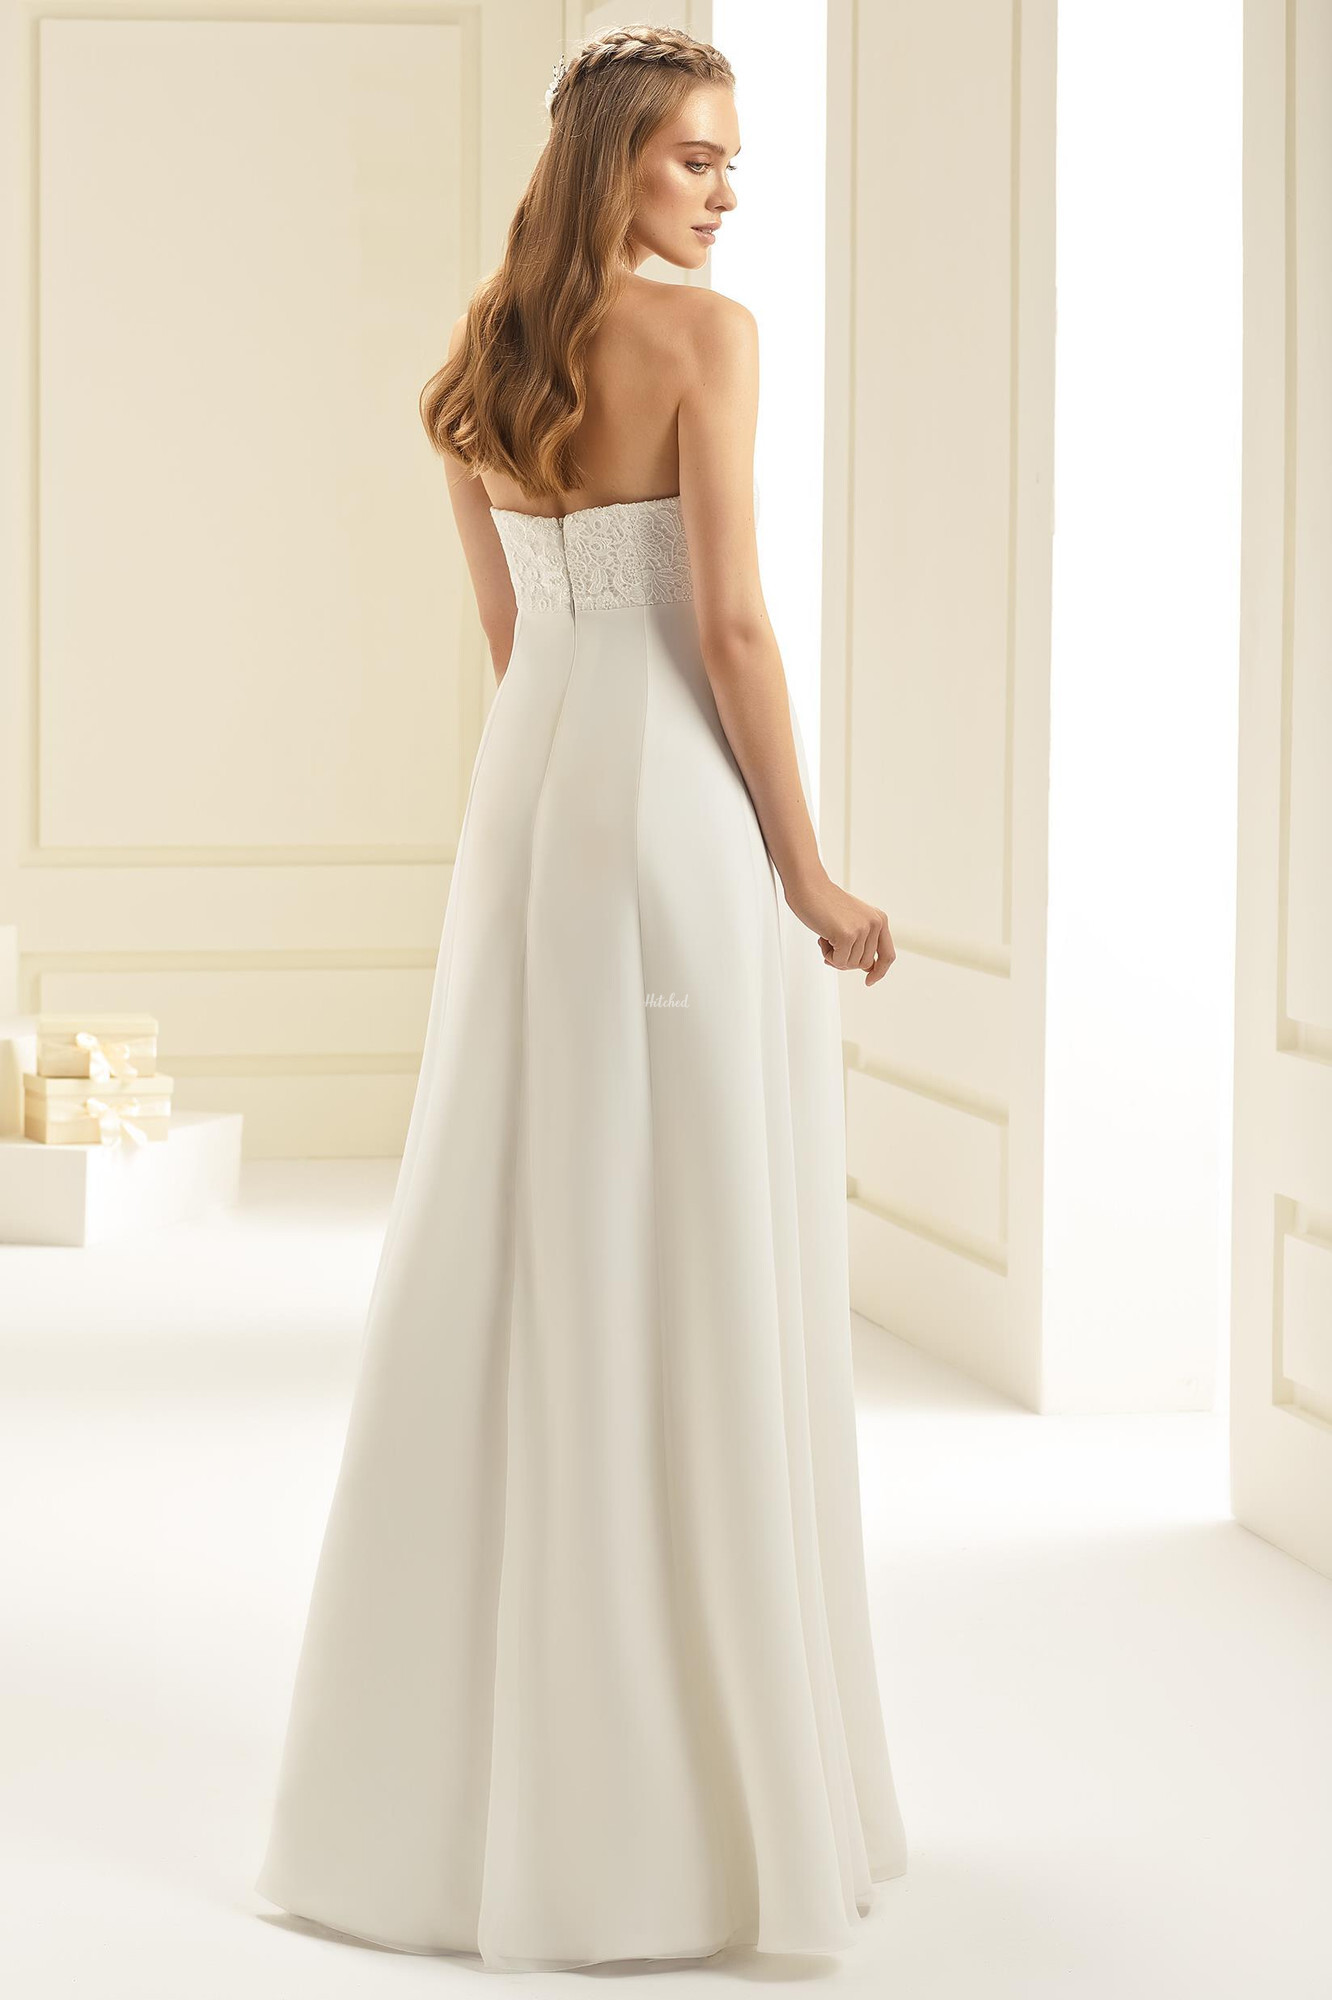 Grecian Wedding Dresses Top 10 Grecian Wedding Dresses Find The Perfect Venue For Your Special 